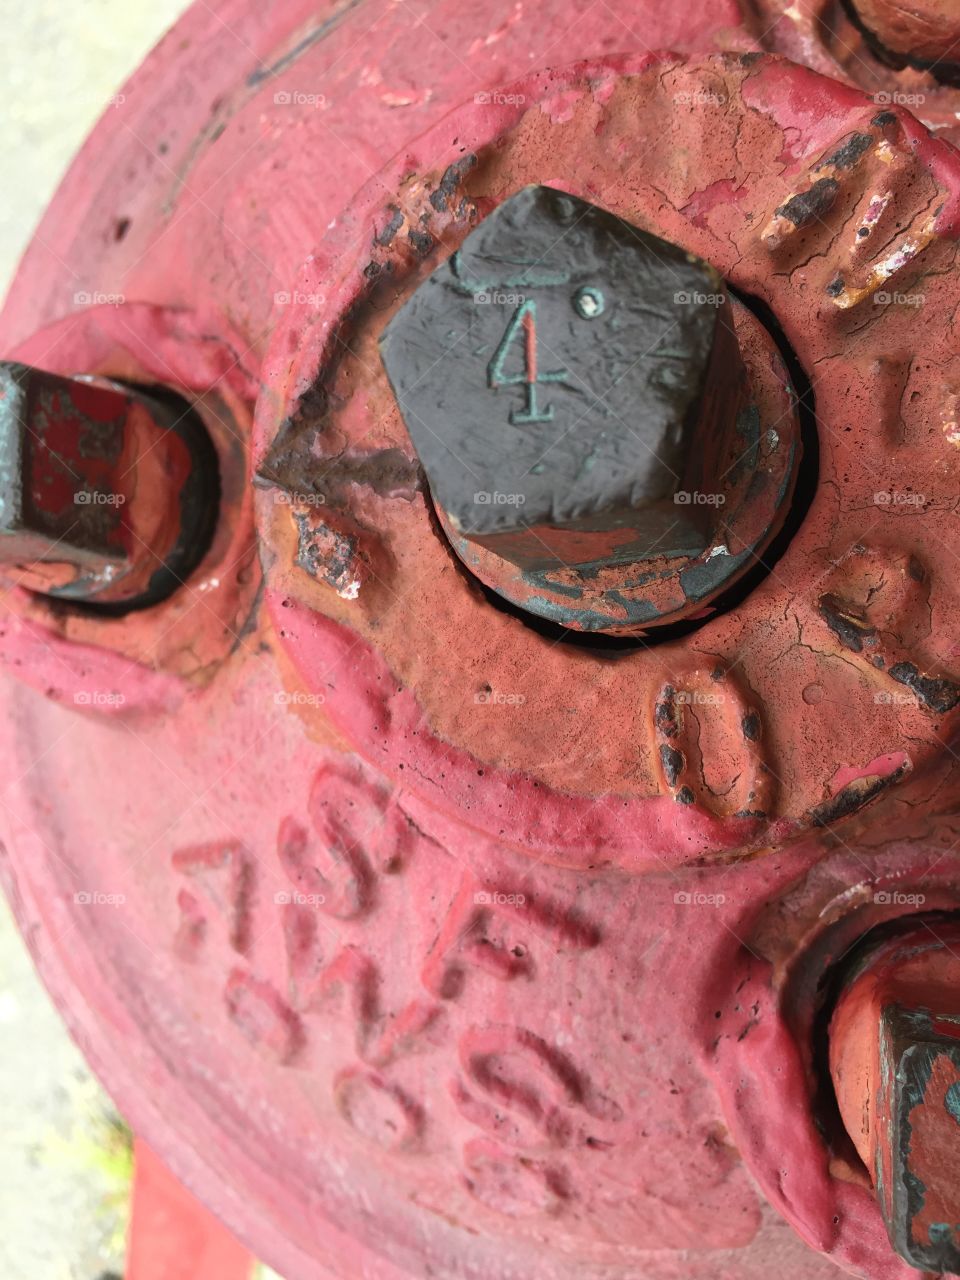 Extreme closeup fire hydrant 